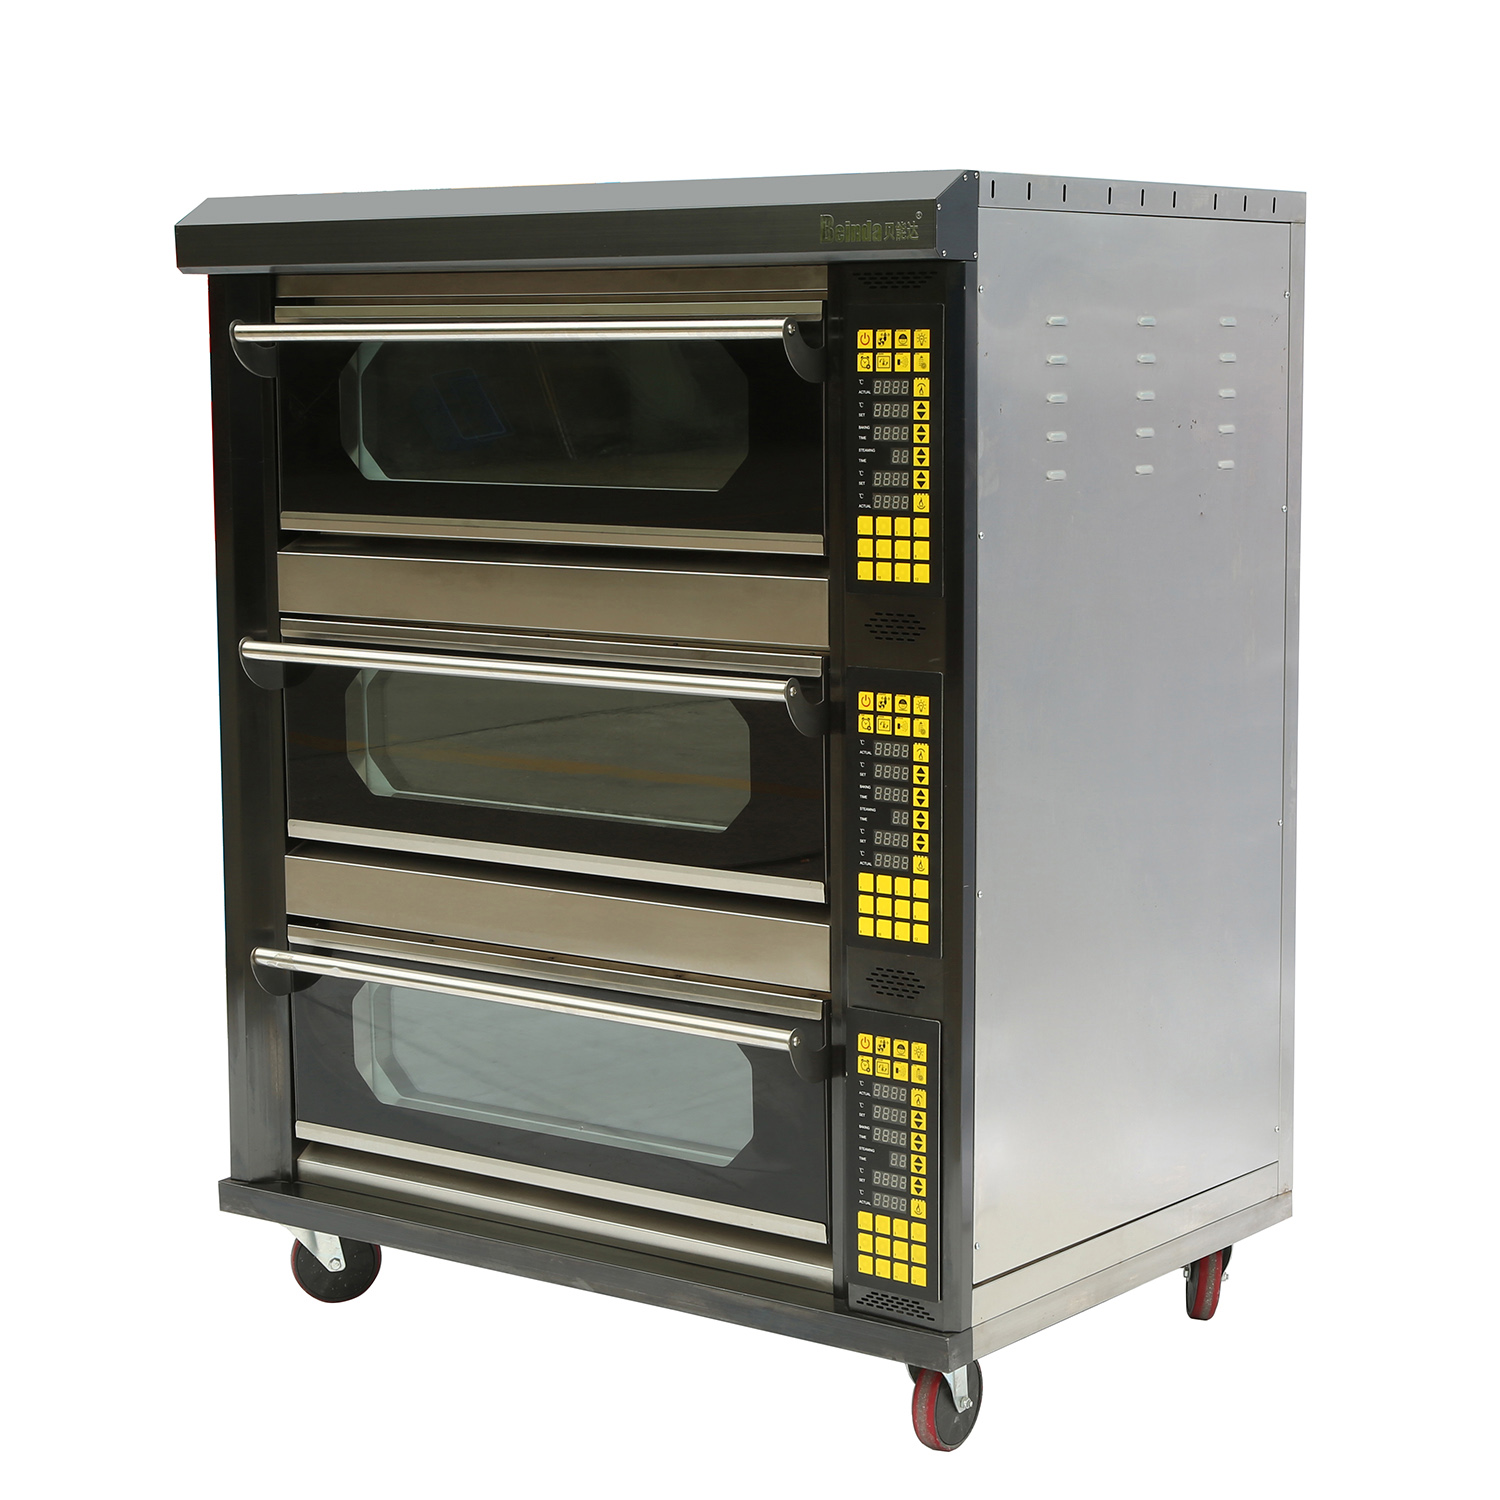 Baking Deck Oven with computer control panel